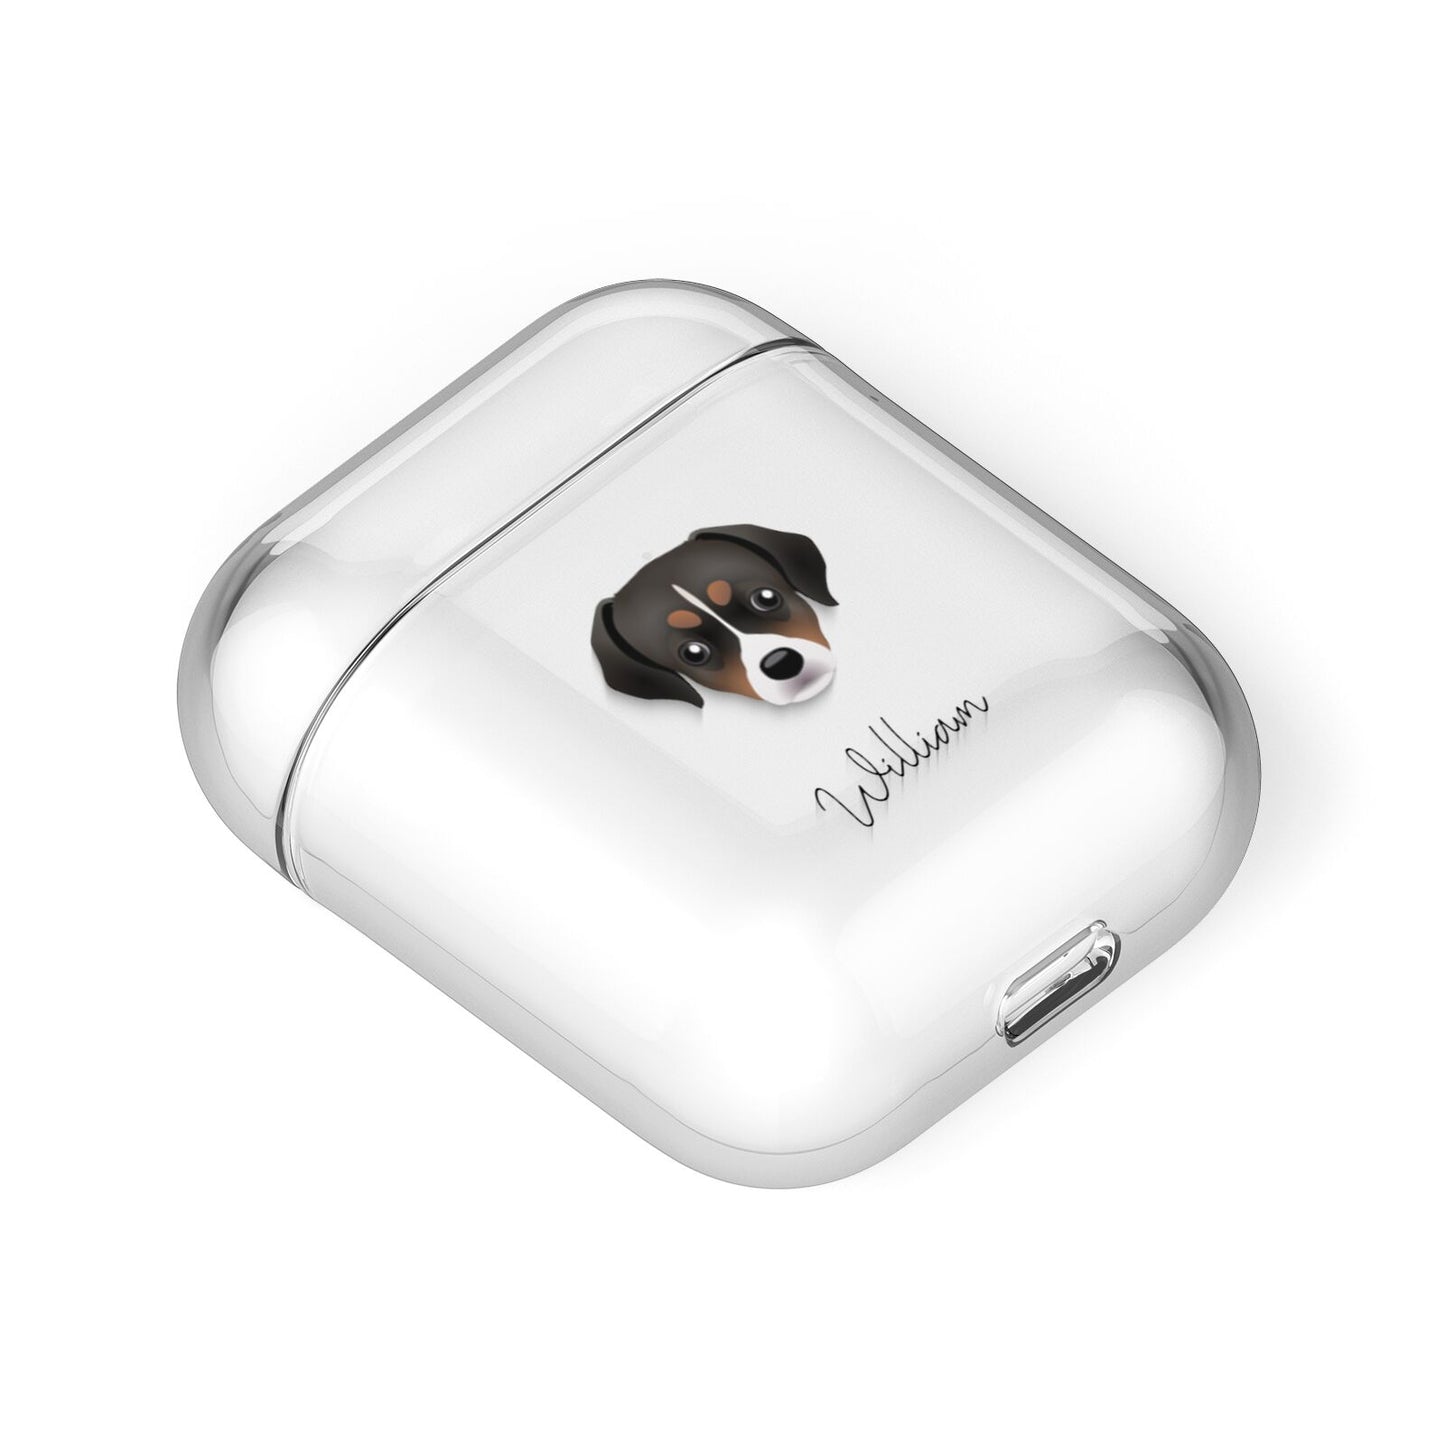 Cheagle Personalised AirPods Case Laid Flat